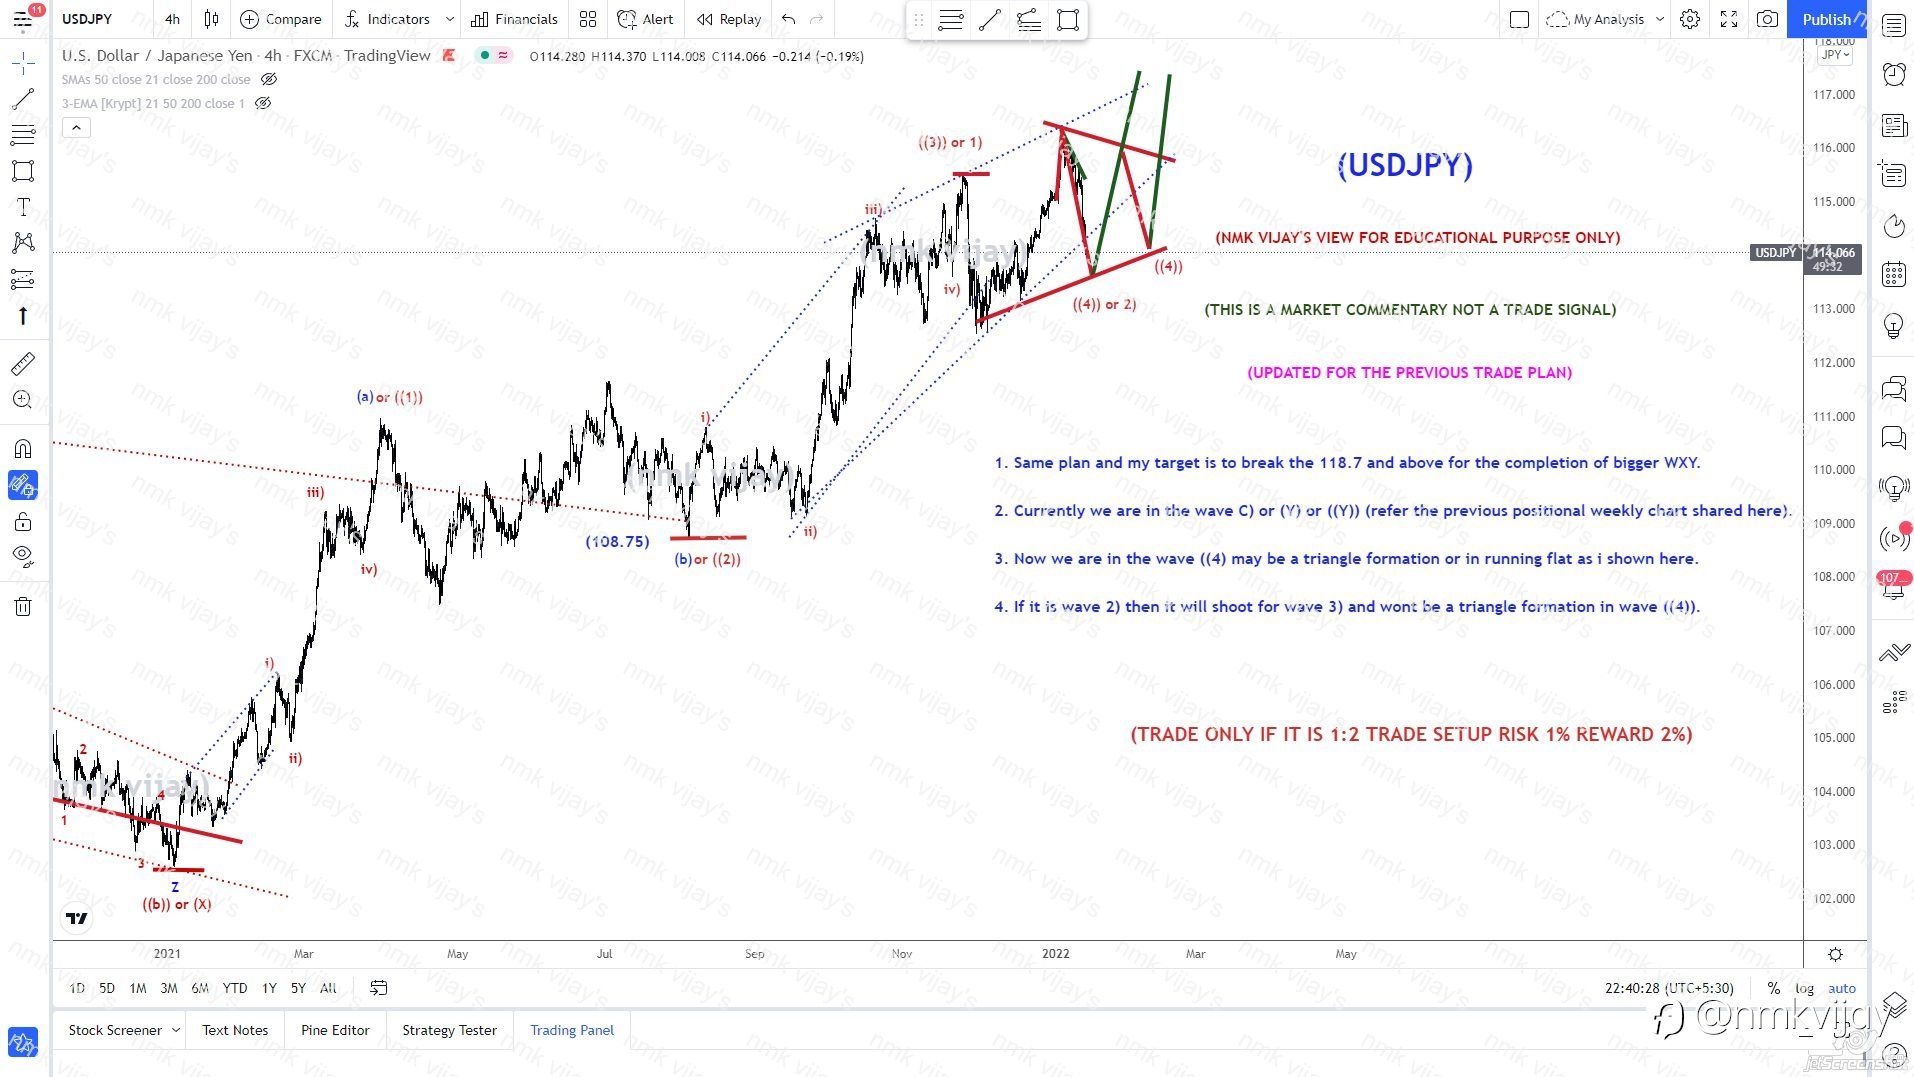 USDJPY-We are in way ((4)) as a triangle or running flat or 2)